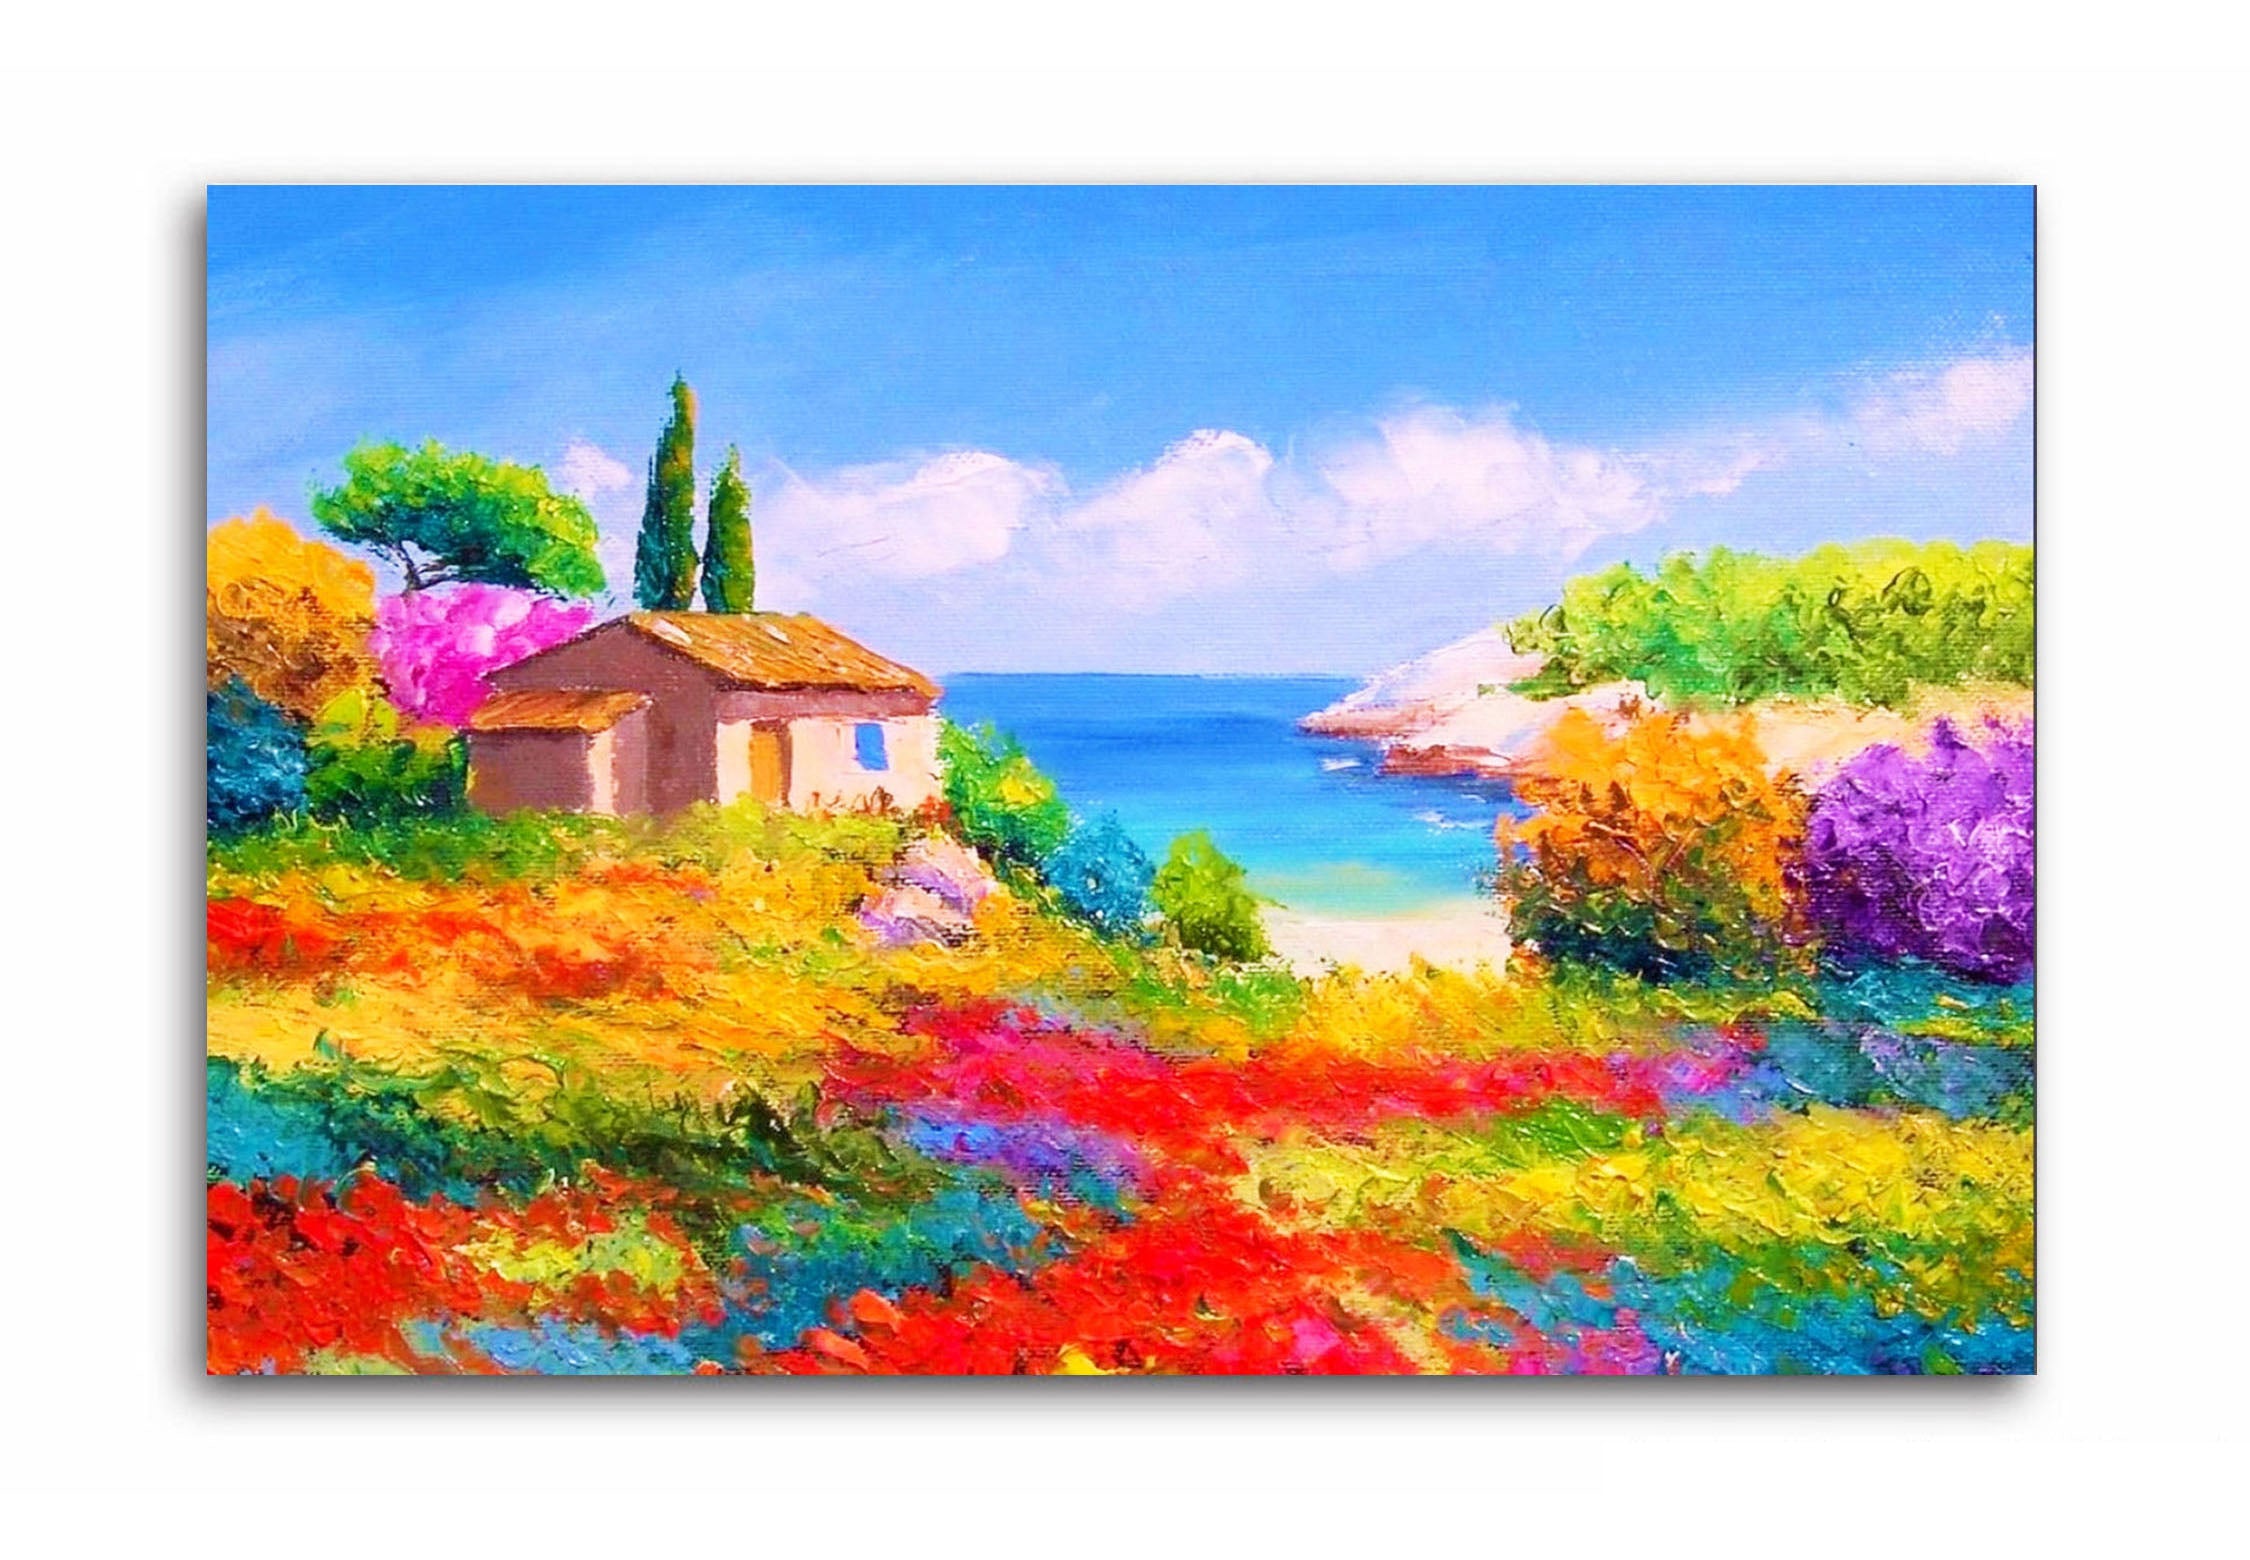 The Village by The Sea - Unframed Canvas Painting